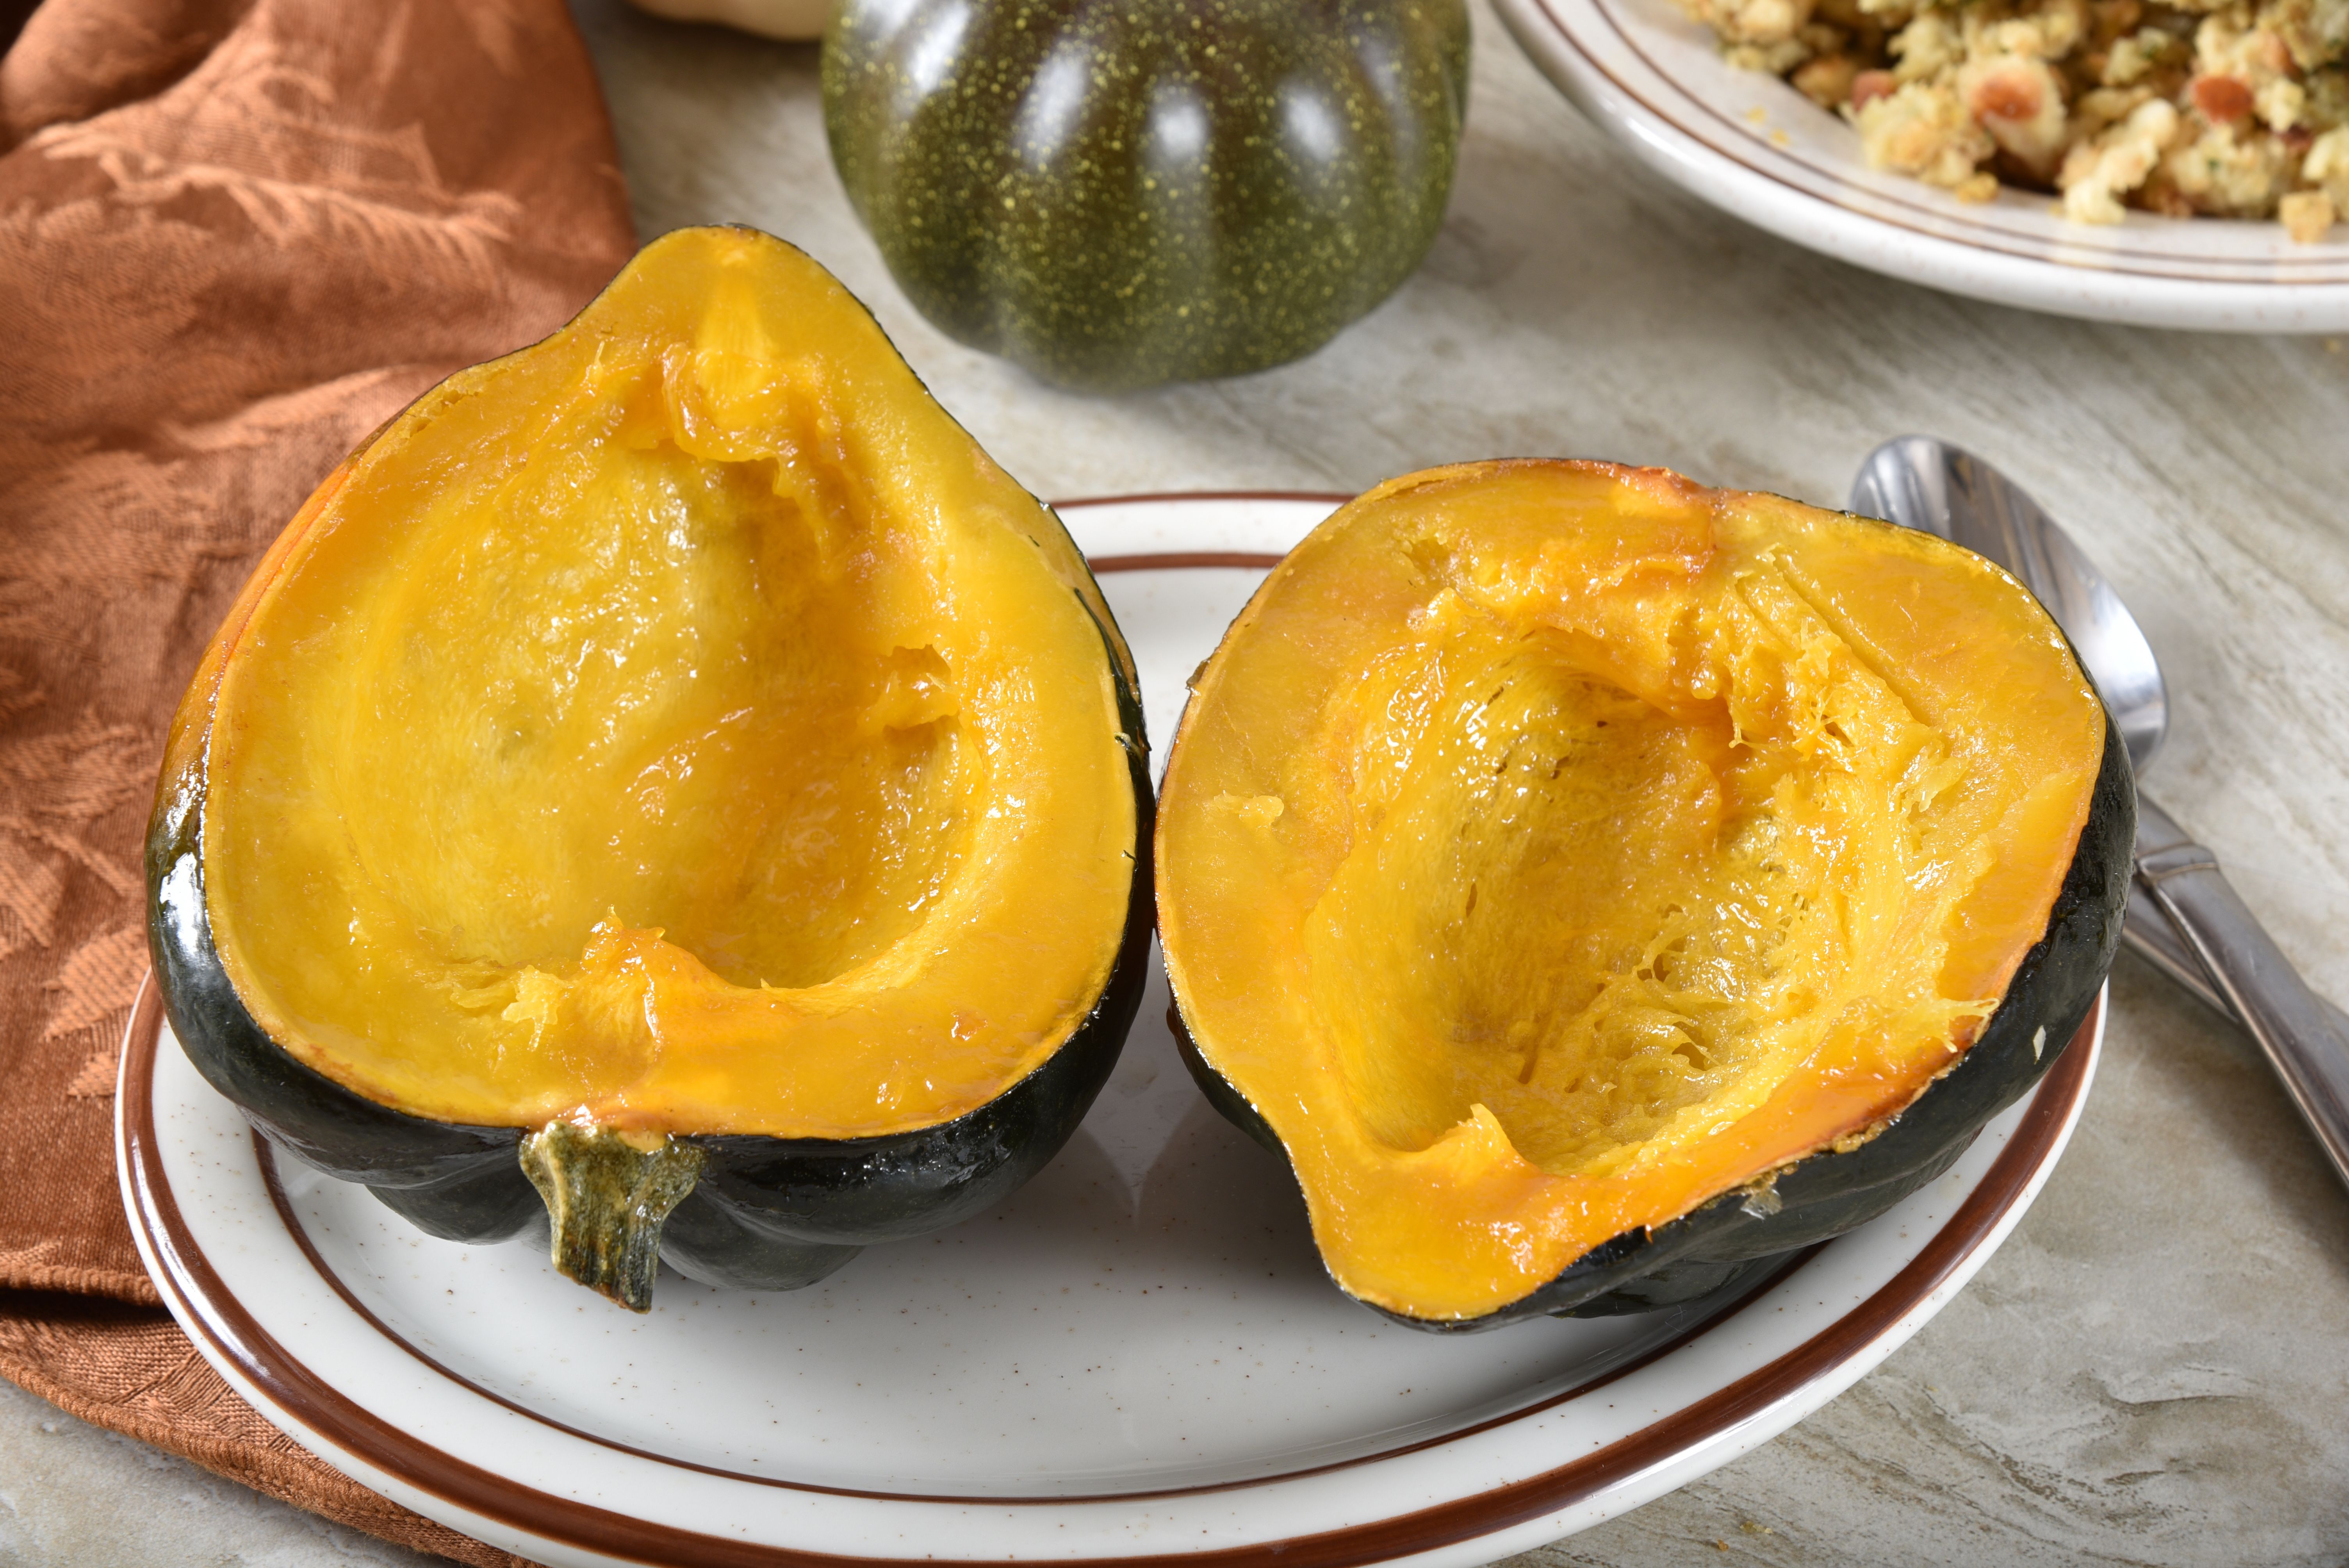 Welcoming October with Stuffed Squash!